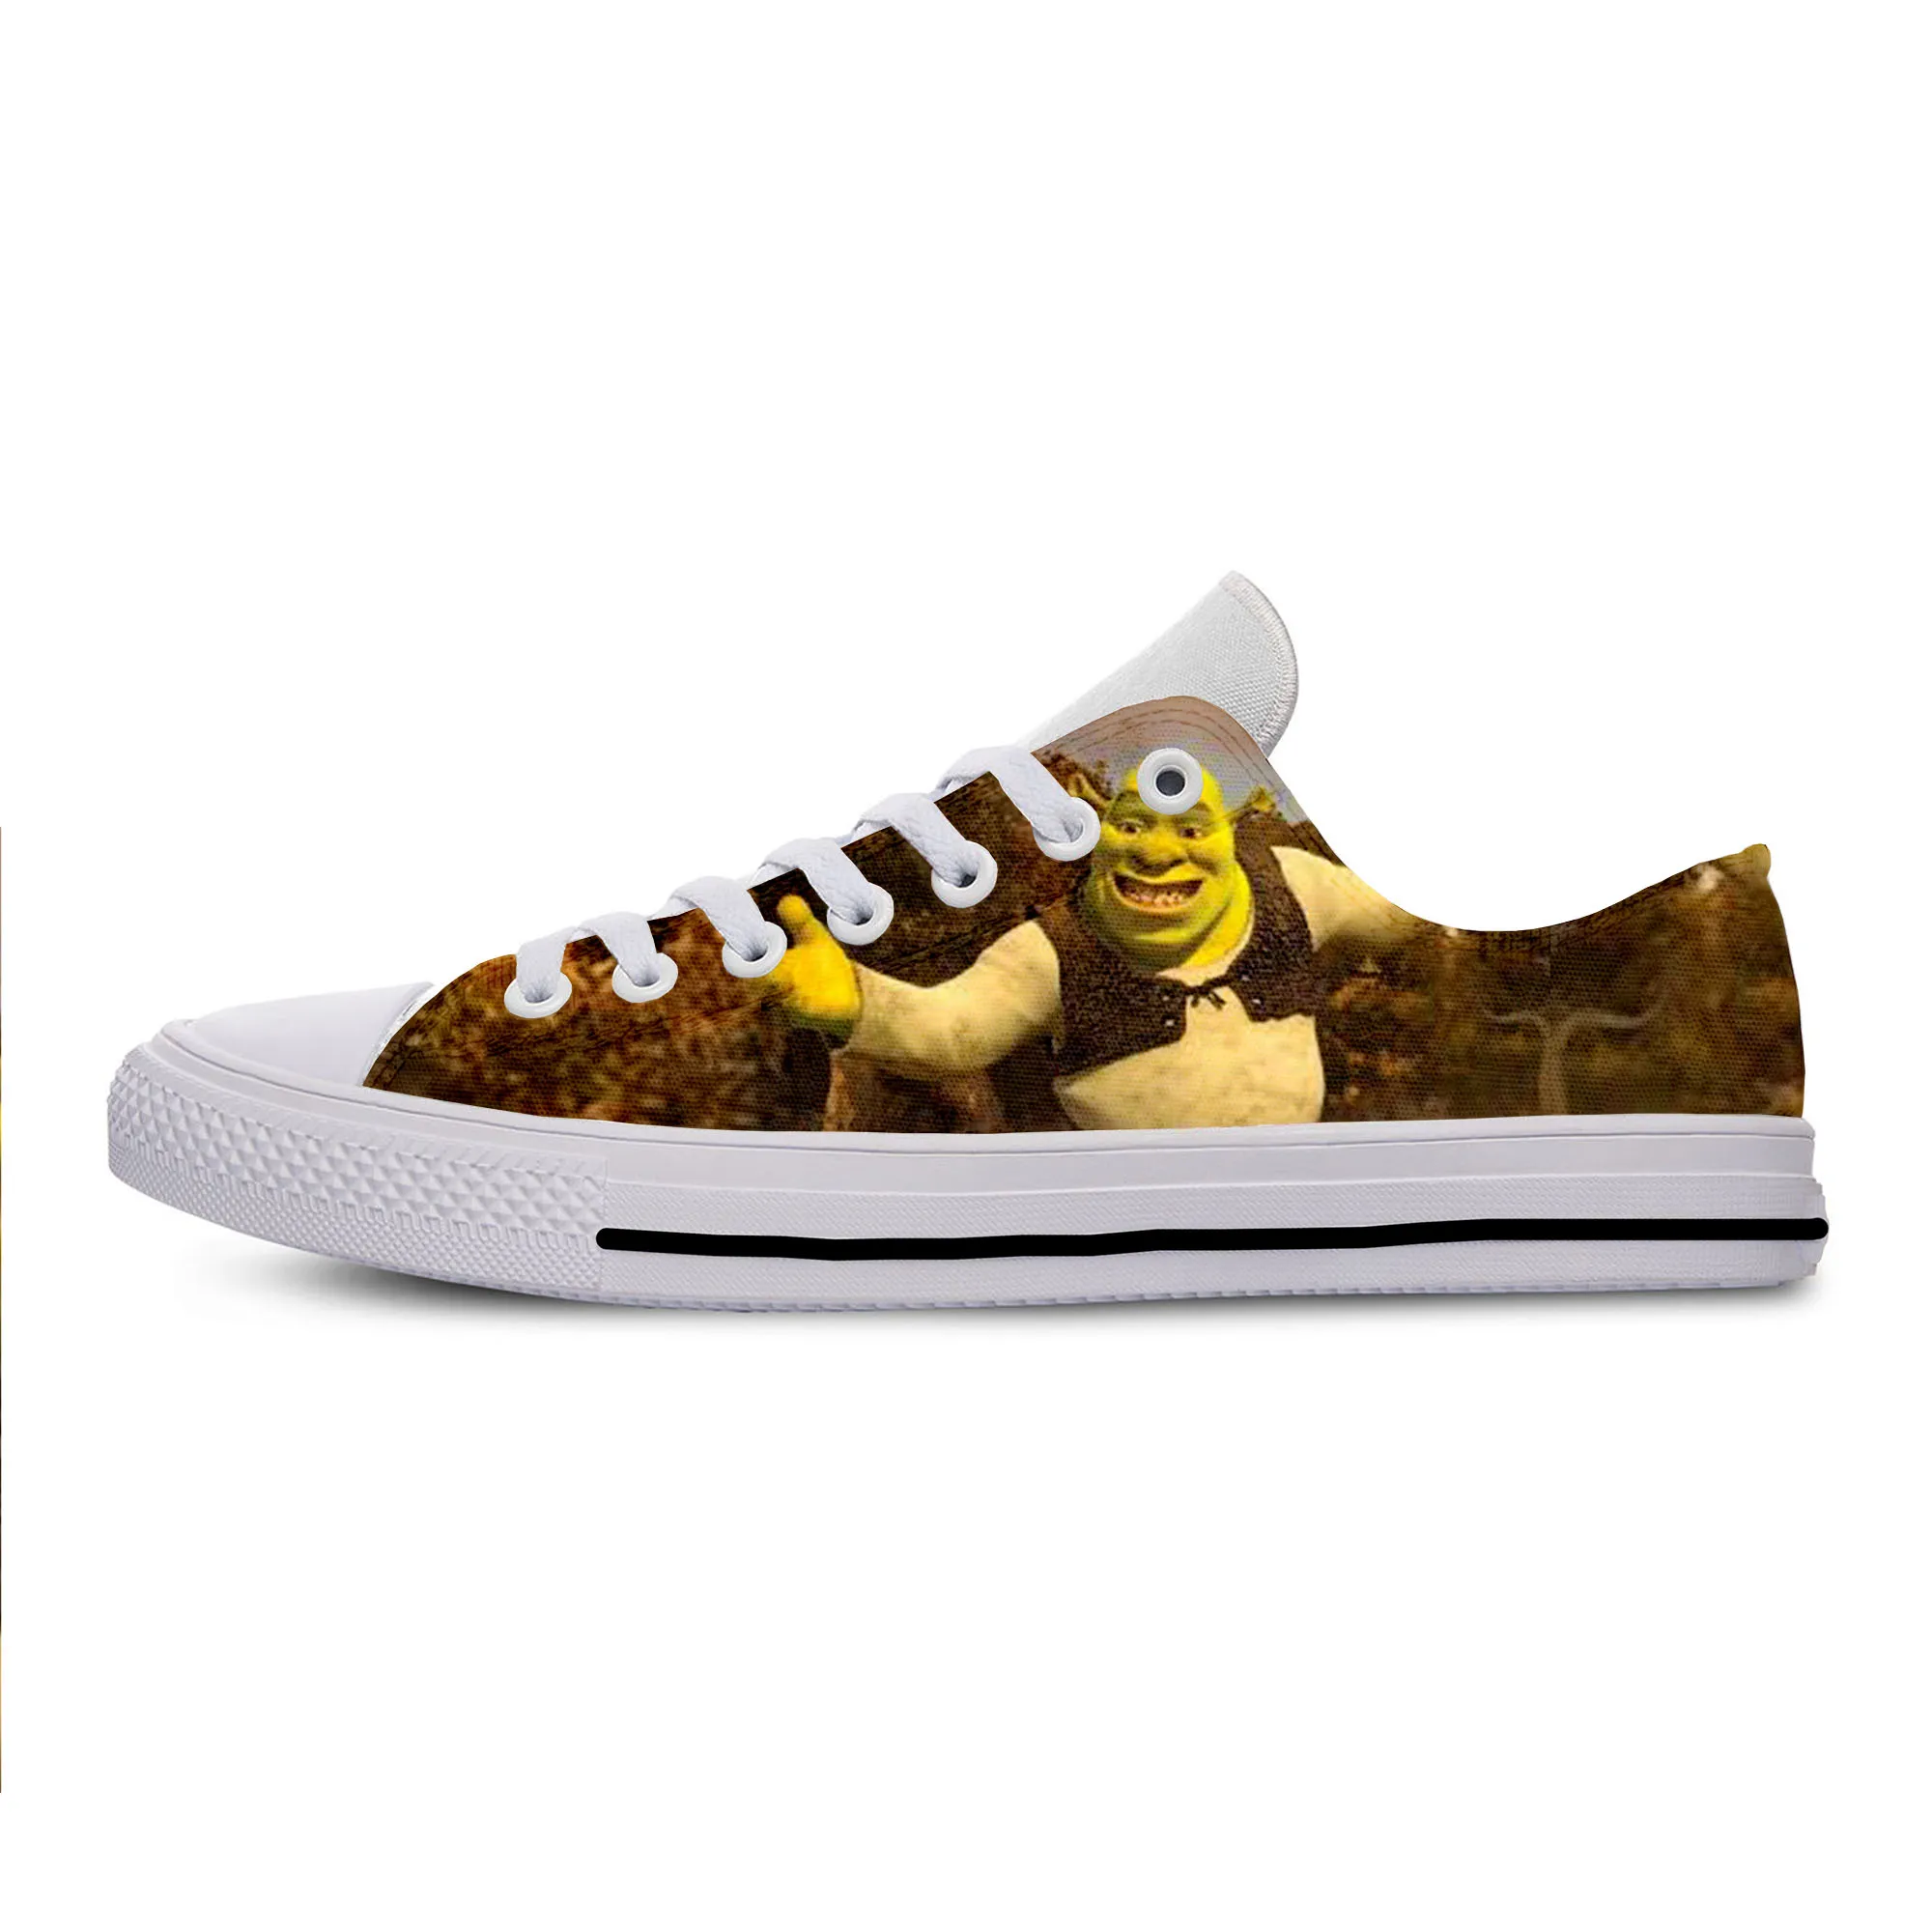 2019 Hot Cool Fashion New Summer Sneakers Handiness Casual Shoes 3D Printed Cartoon Cute Funny Fantasy Movie For Men Women Shrek